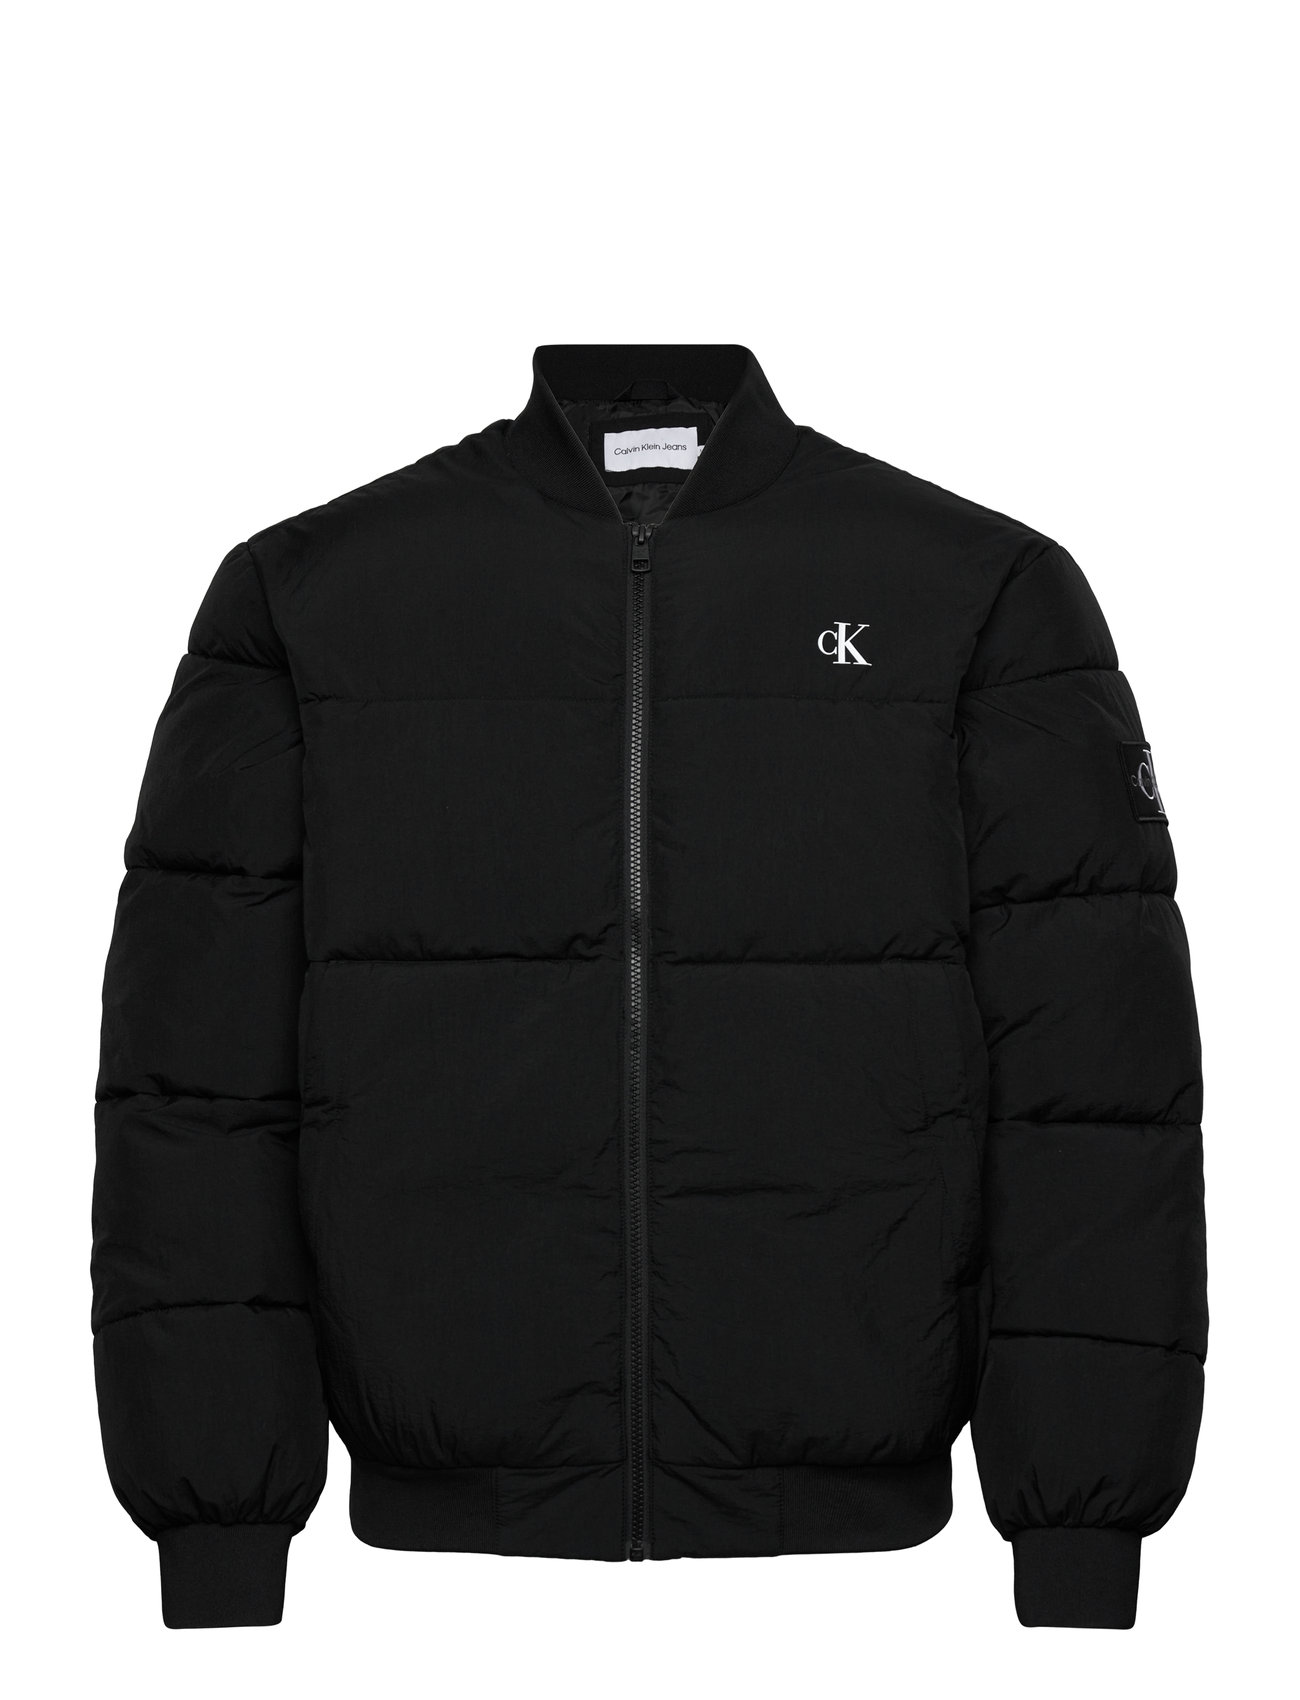 Calvin Klein Jeans €. Bomber easy Calvin Jeans from - 99.95 Jacket delivery Boozt.com. Klein Jackets Bomber returns Fast and at Buy Commercial online